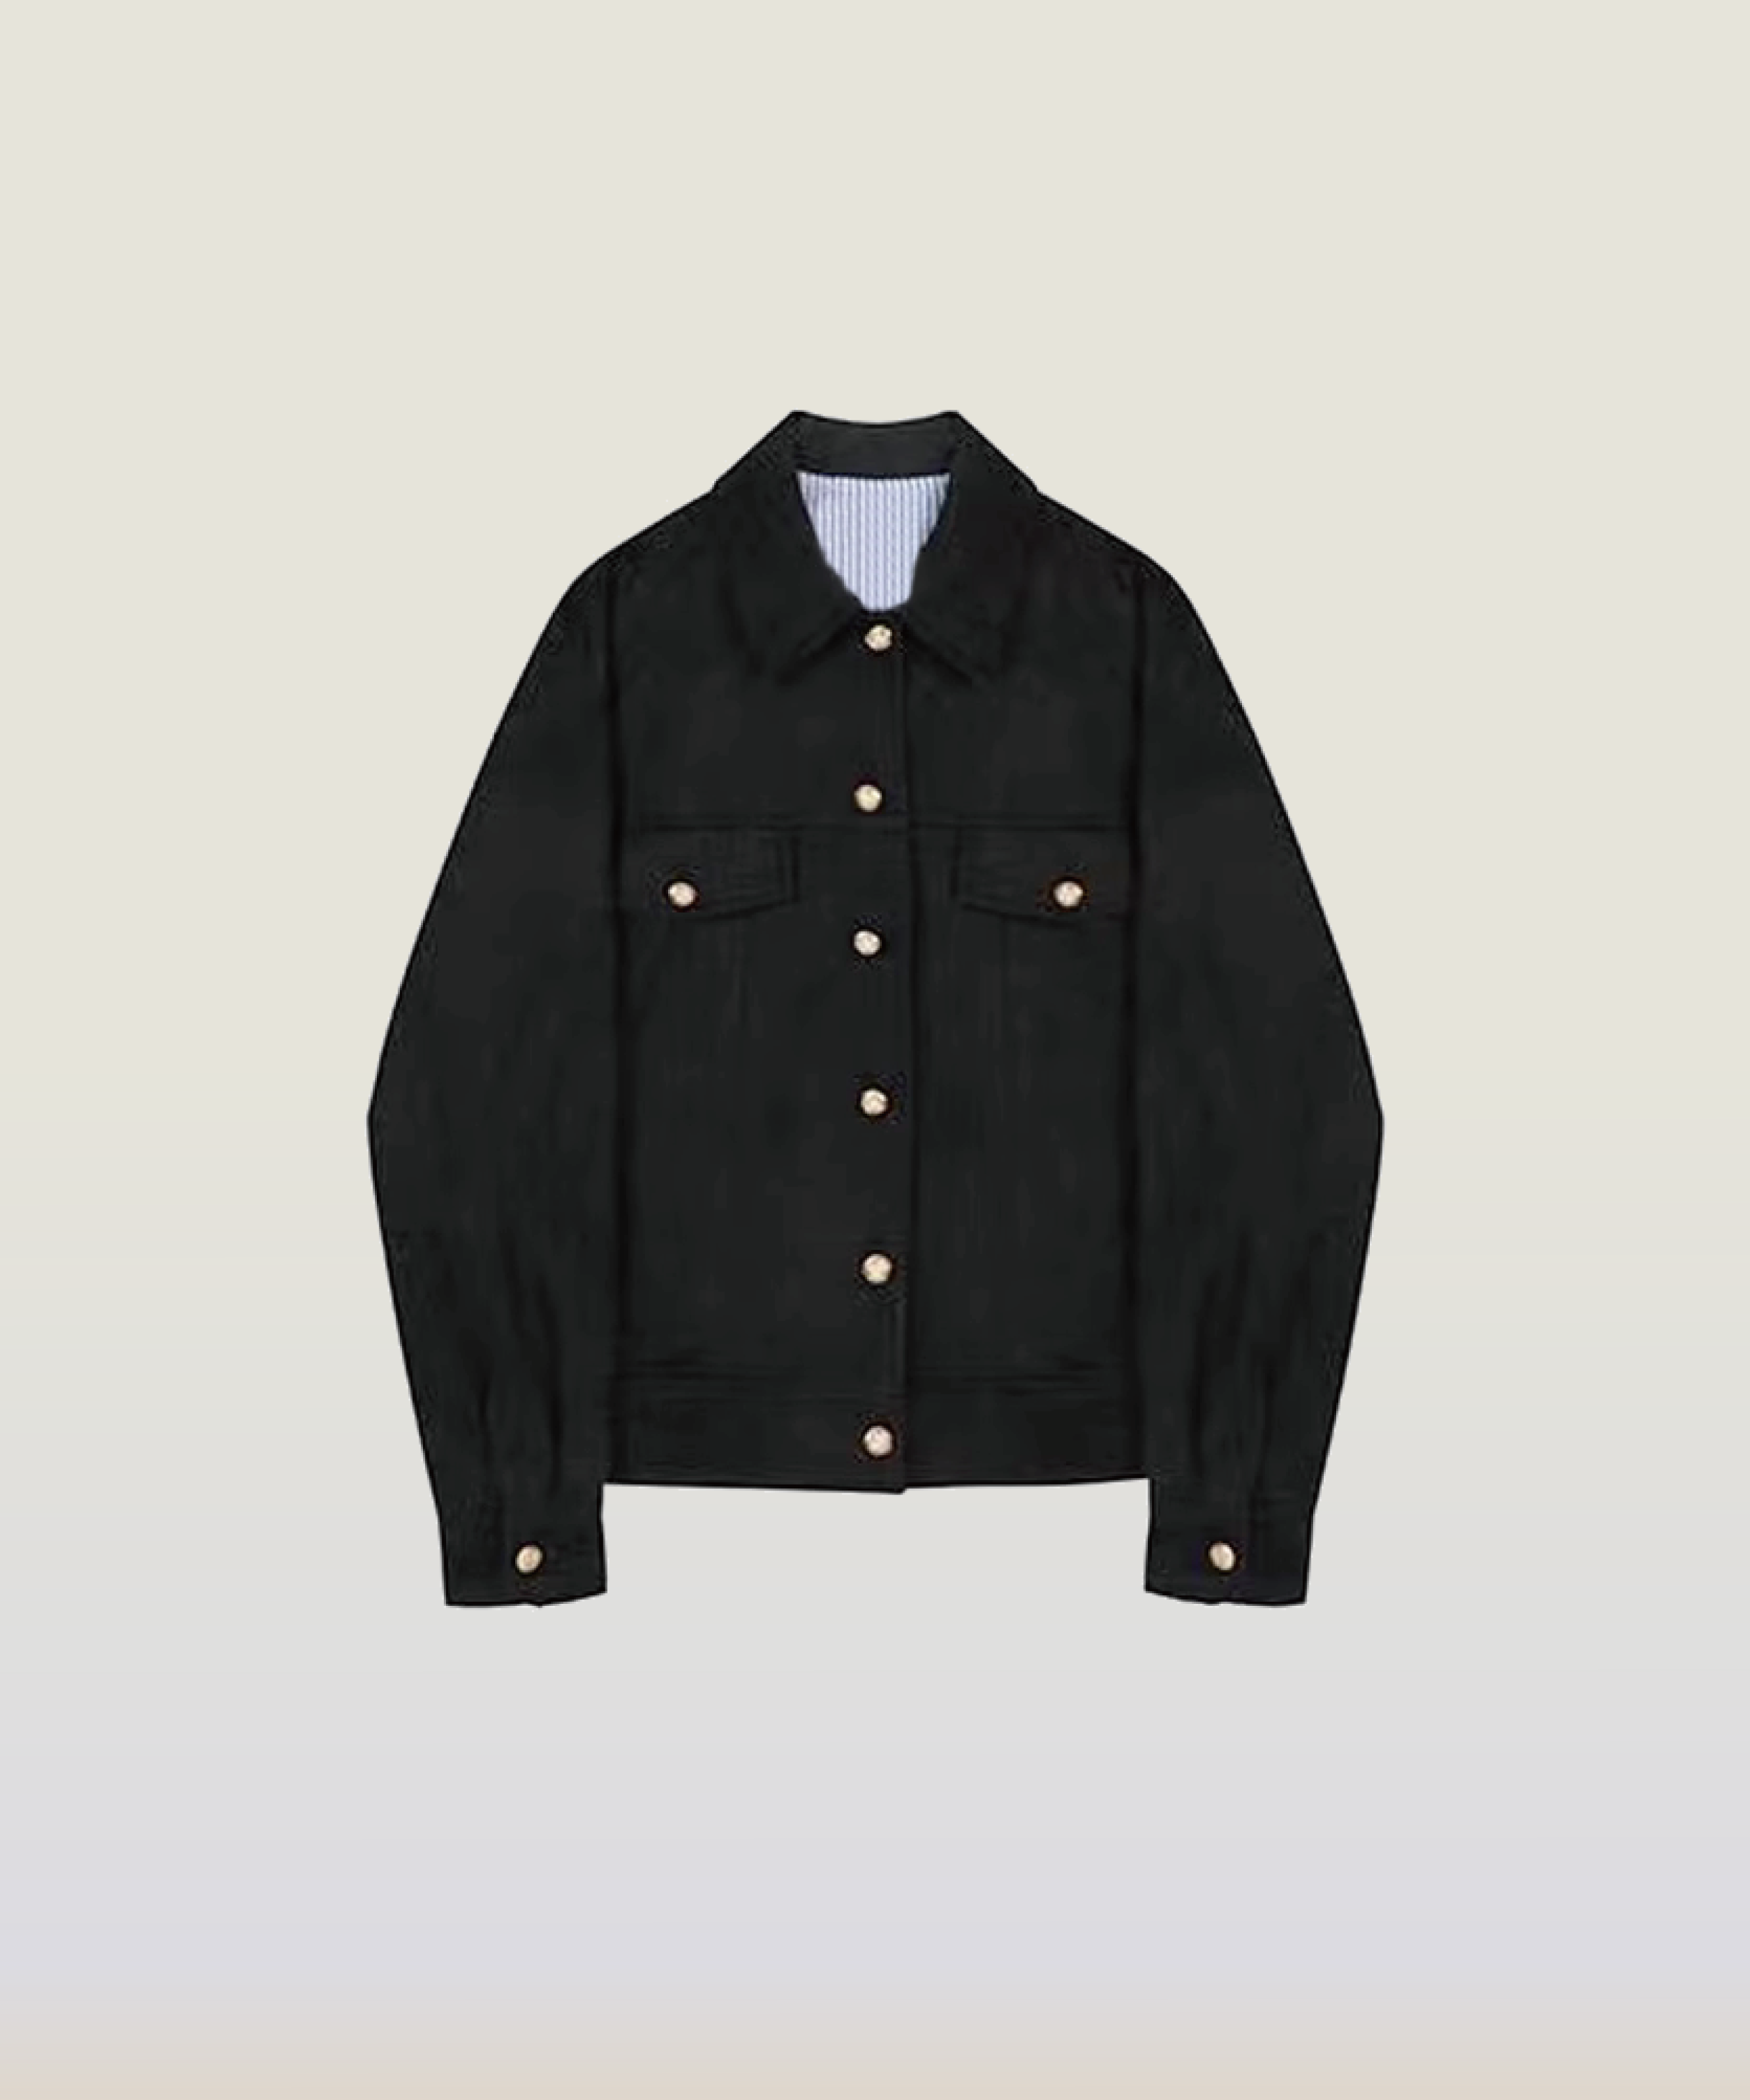 Work Style Silhouette Jacket